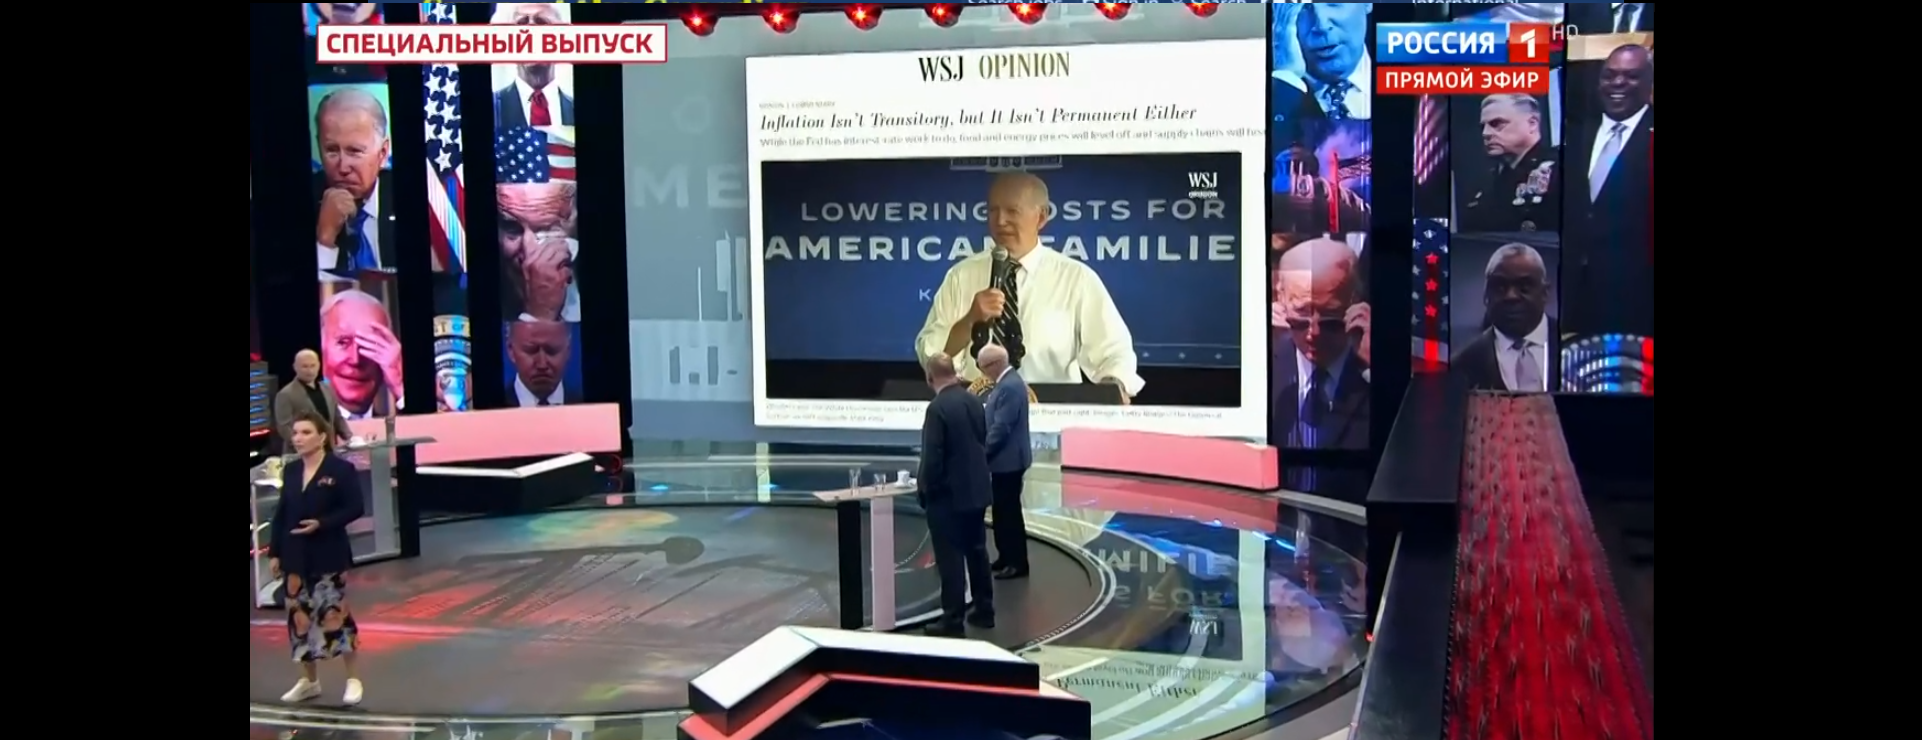 How Russian Television News Uses Western News Coverage To Advance Its Narratives